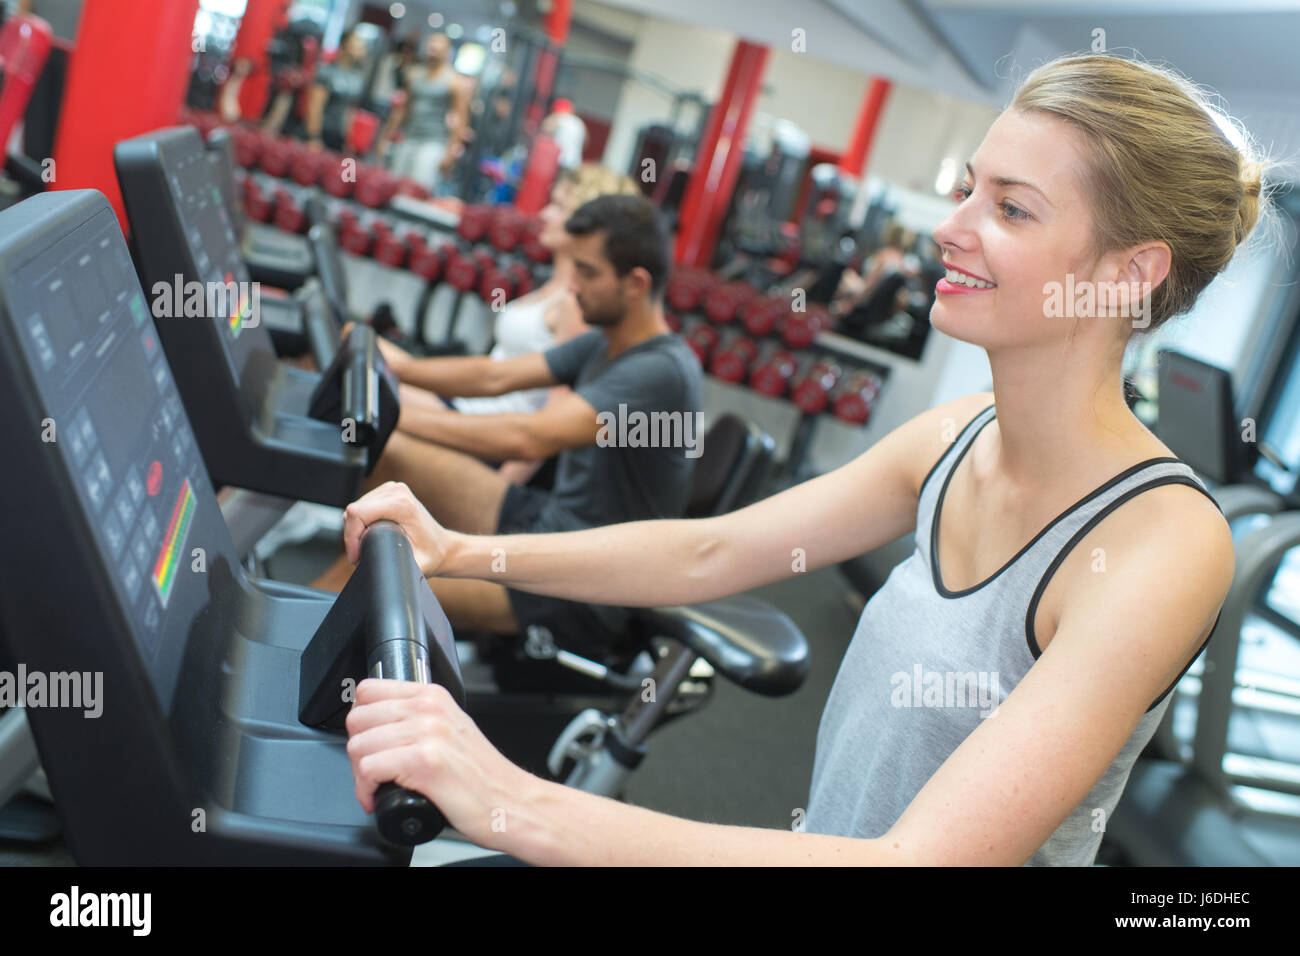 Stepmachine High Resolution Stock Photography and Images - Alamy